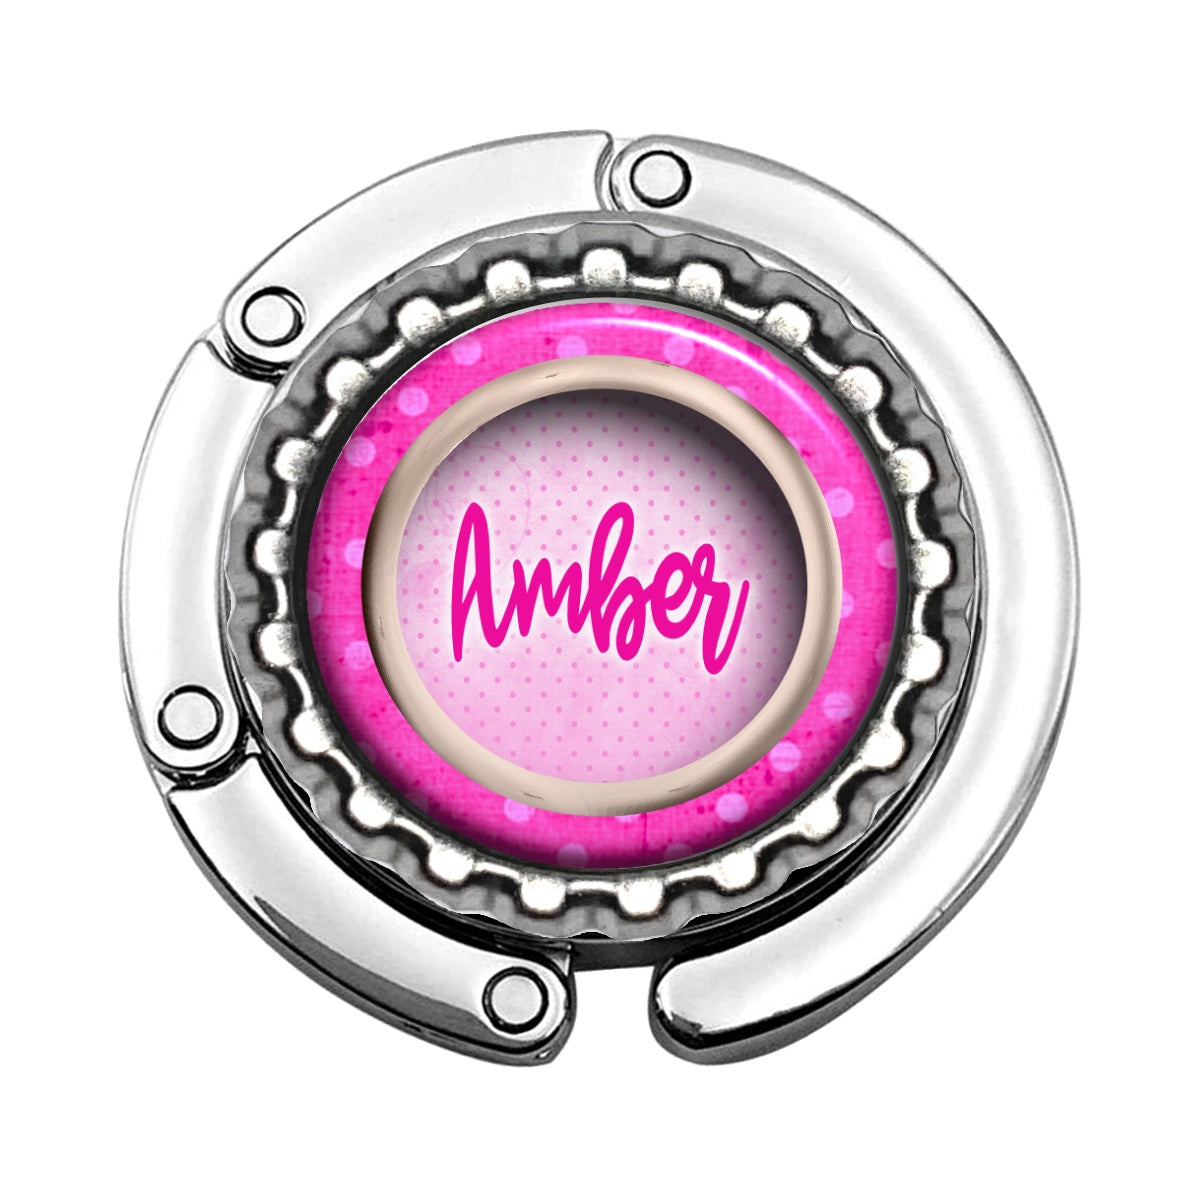 a pink and silver object with the word amber on it